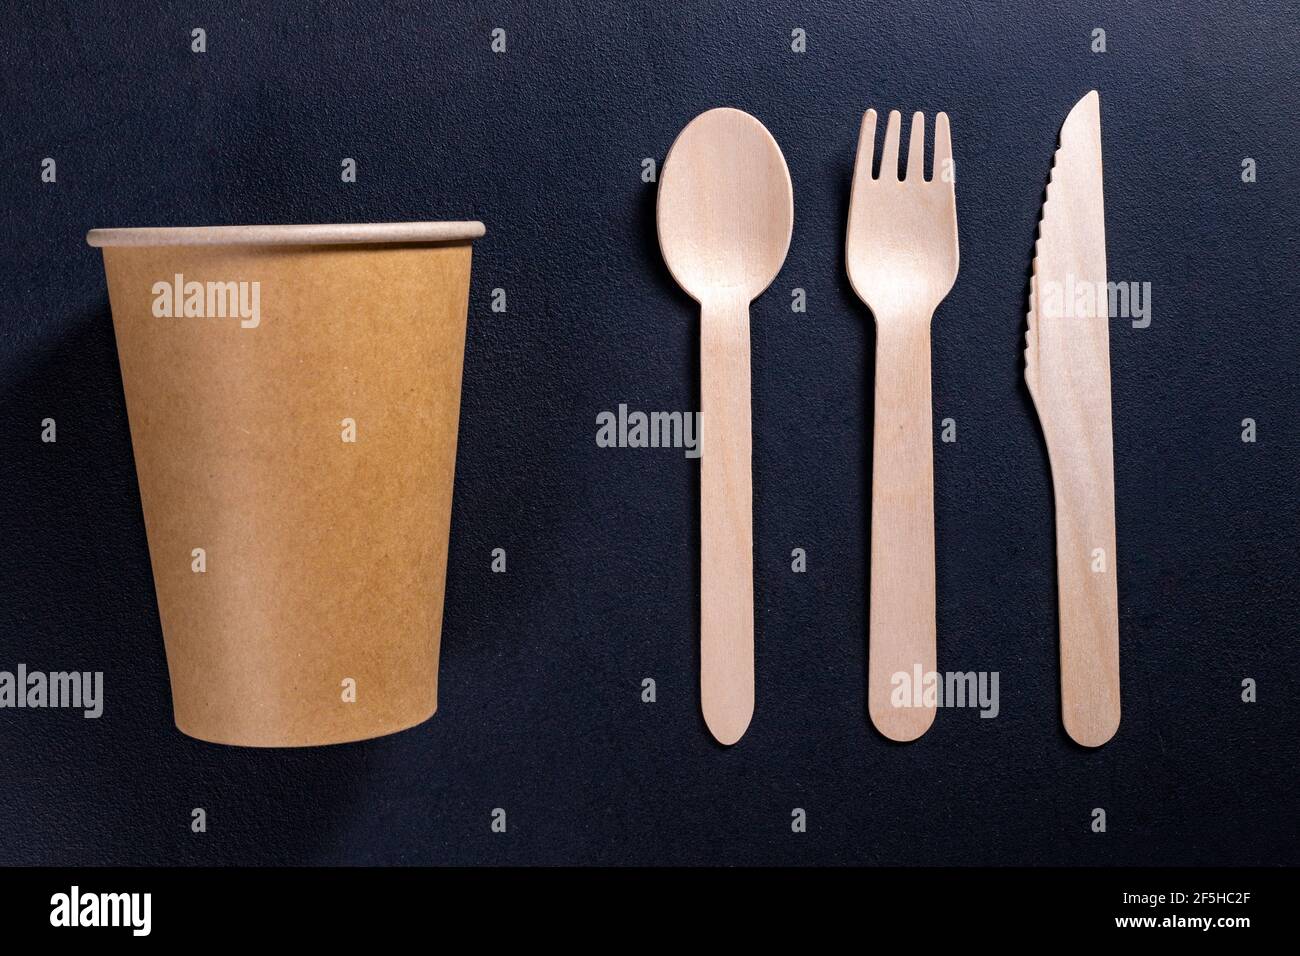 Disposable wooden cutlery and cardboard containers. Accessories for eating outdoors. Dark background. Stock Photo